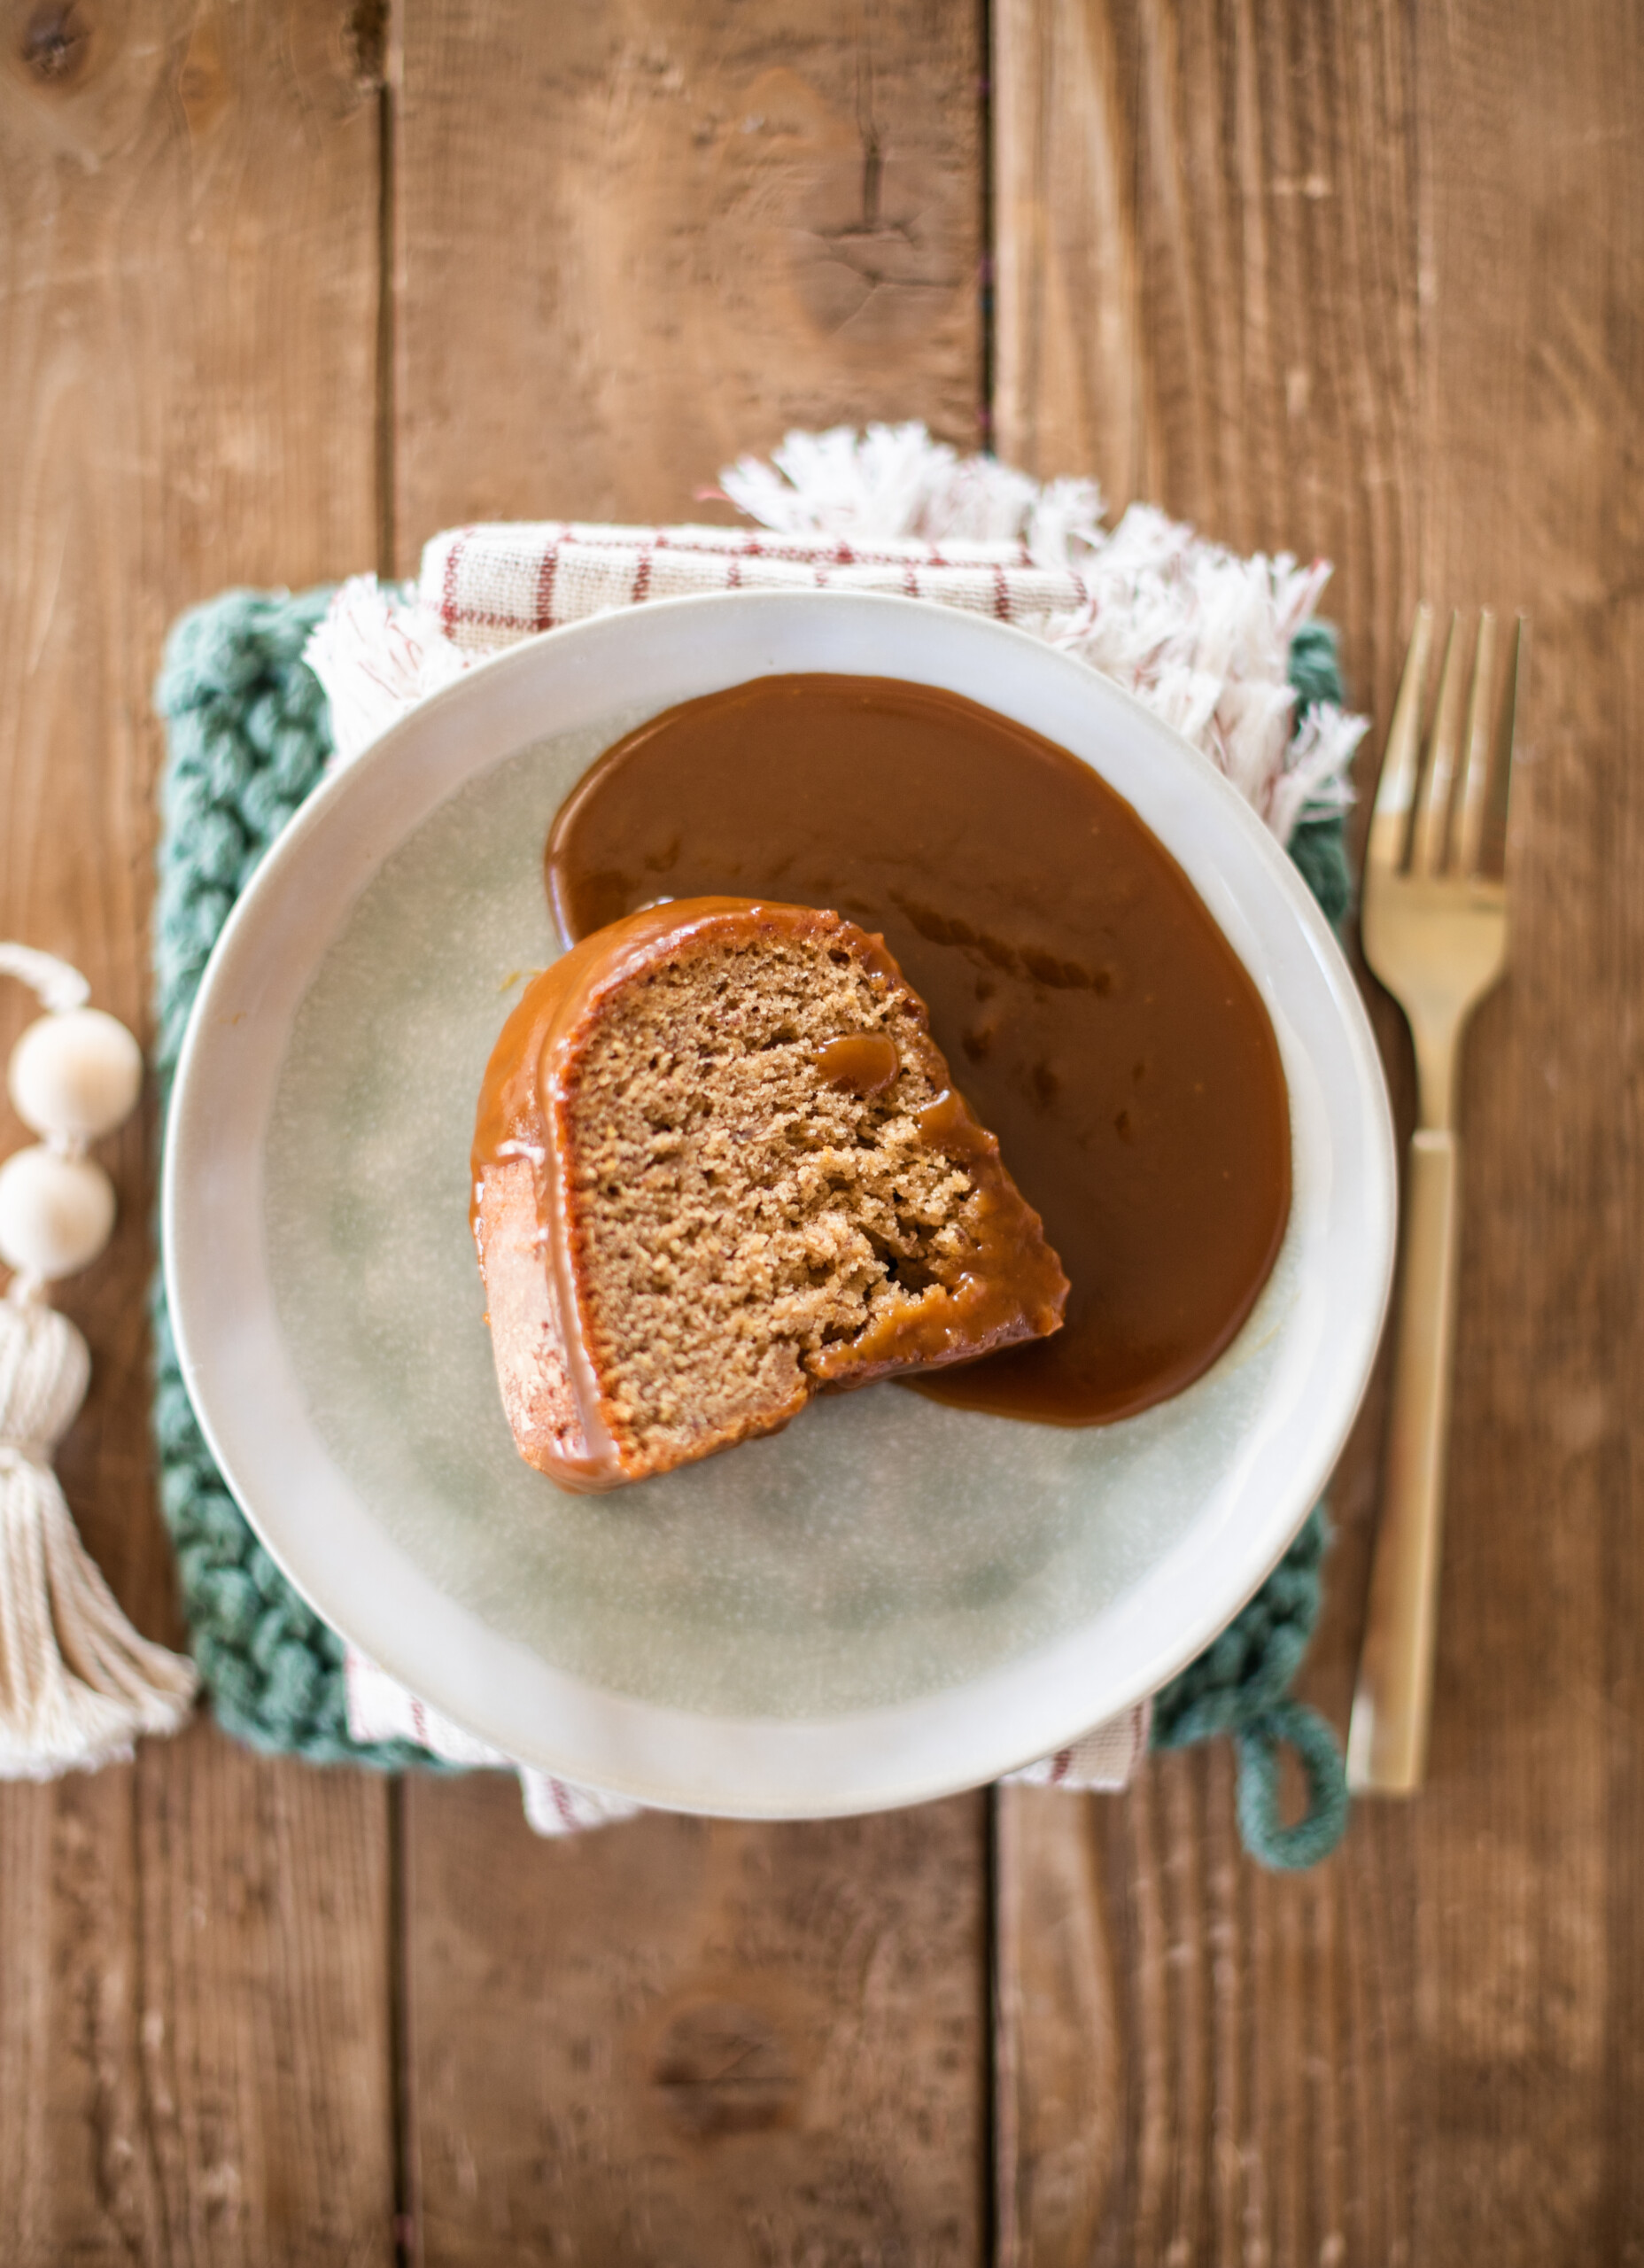 How to serve sticky toffee pudding